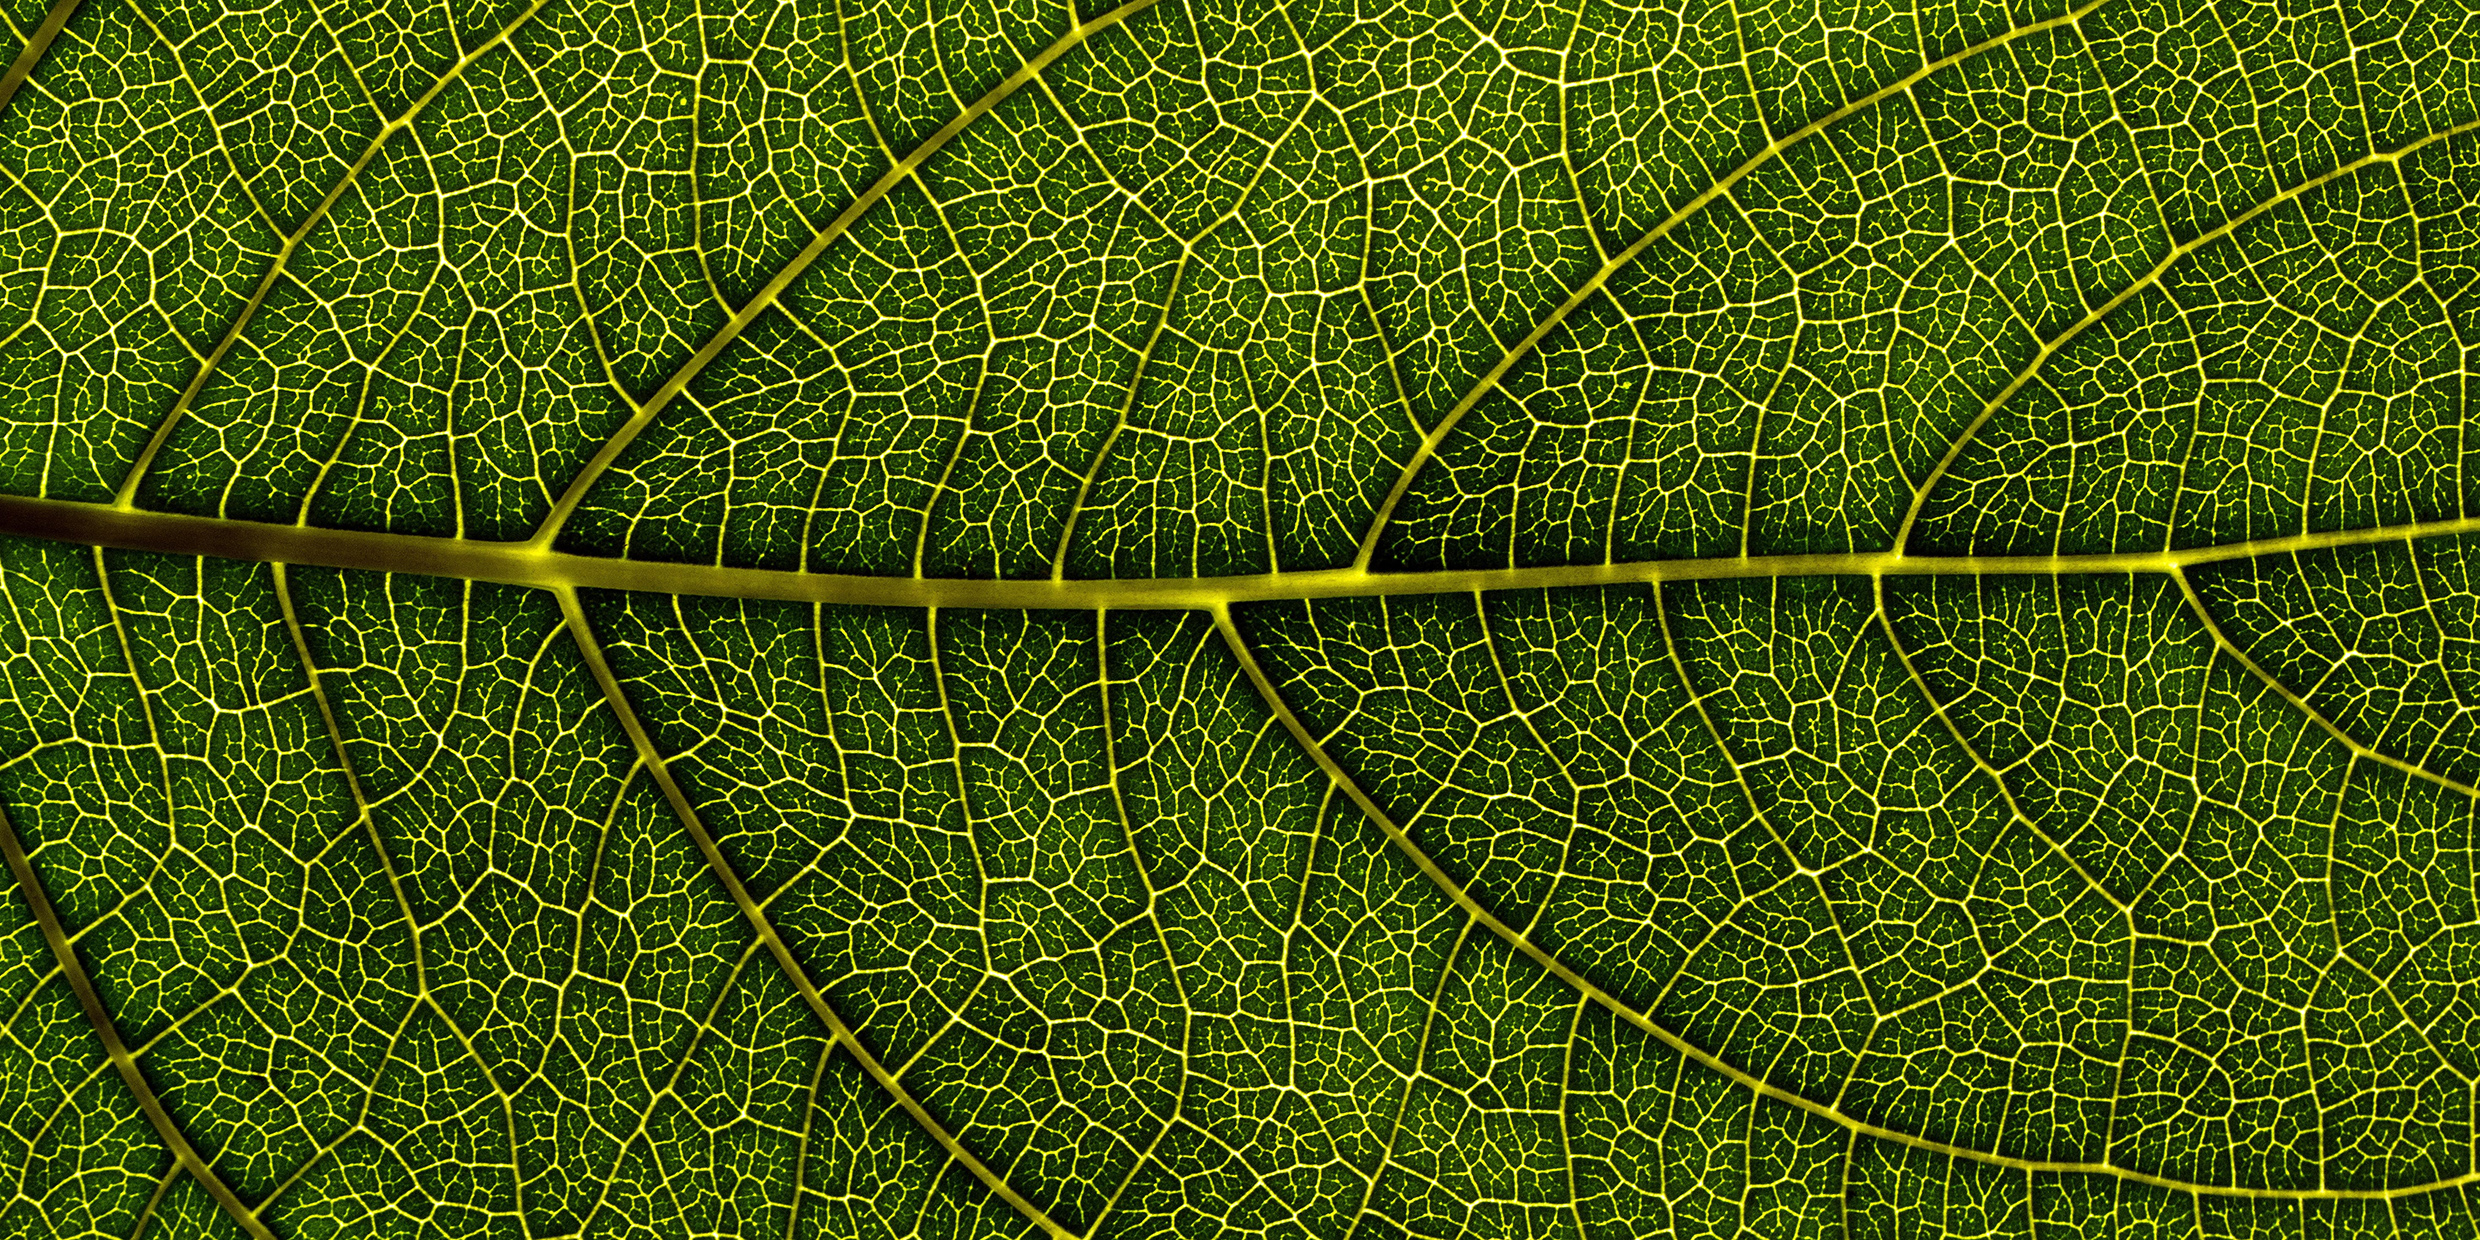 Close up image of a complex network of veins within a green leaf